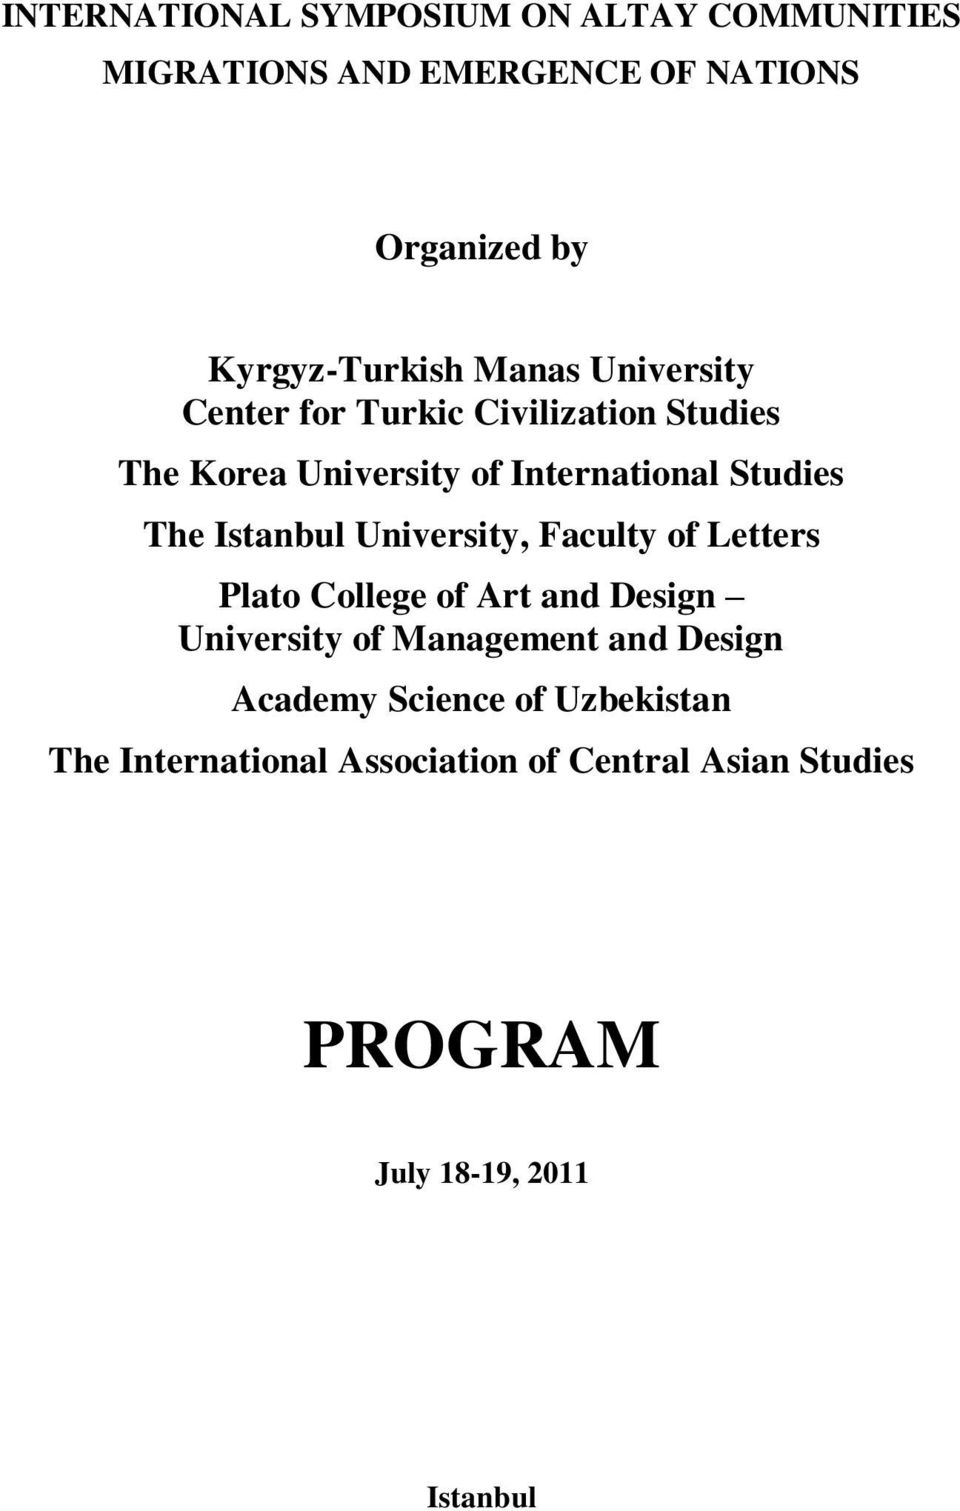 Istanbul University, Faculty of Letters Plato College of Art and Design University of Management and Design